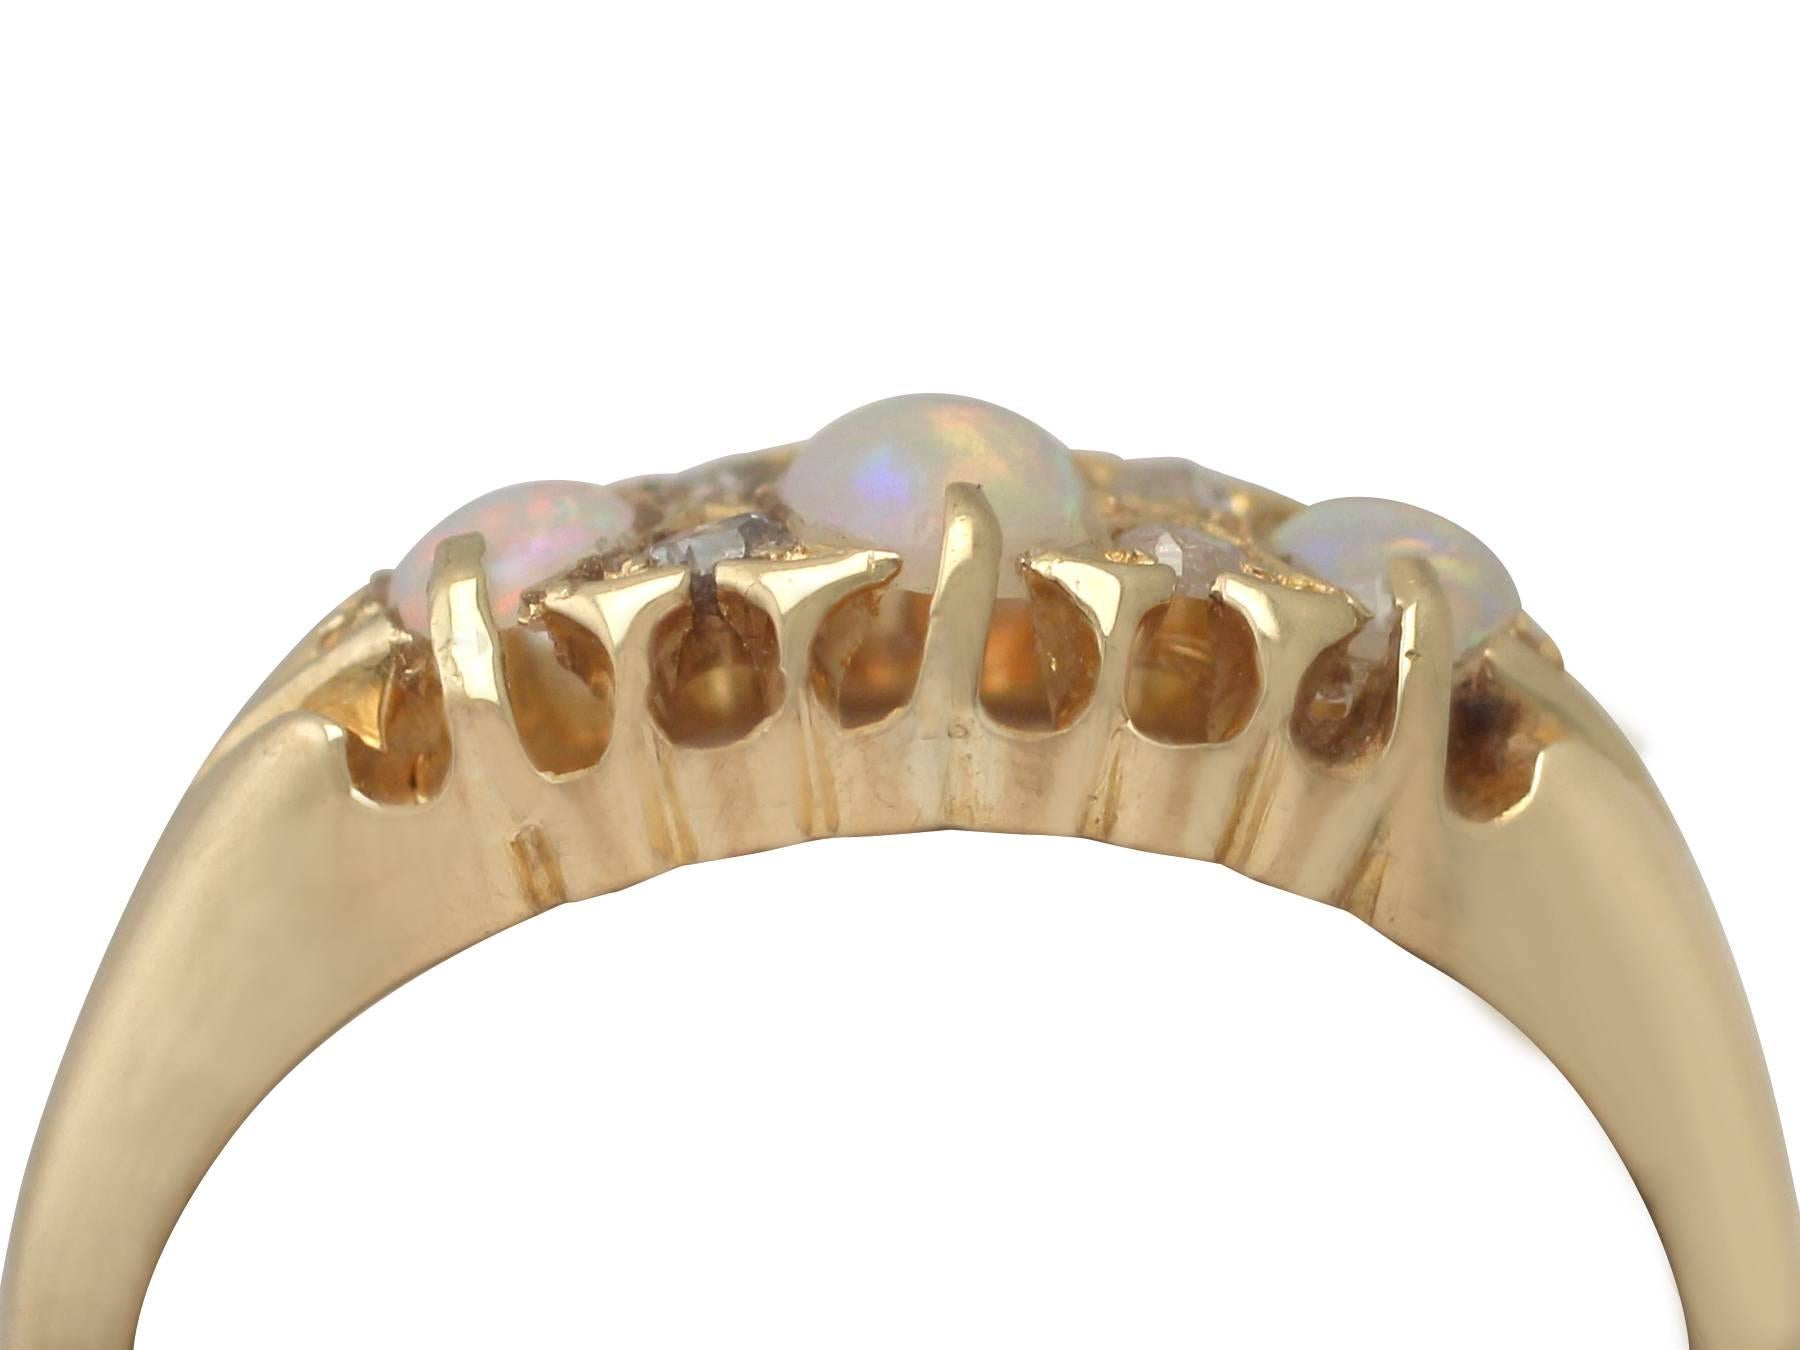 A fine and impressive Edwardian 0.52 carat opal and 0.08 carat diamond, 18 karat yellow gold dress ring; part of our diverse antique jewellery collections

This fine and impressive Edwardian opal and diamond ring has been crafted in 18 k yellow